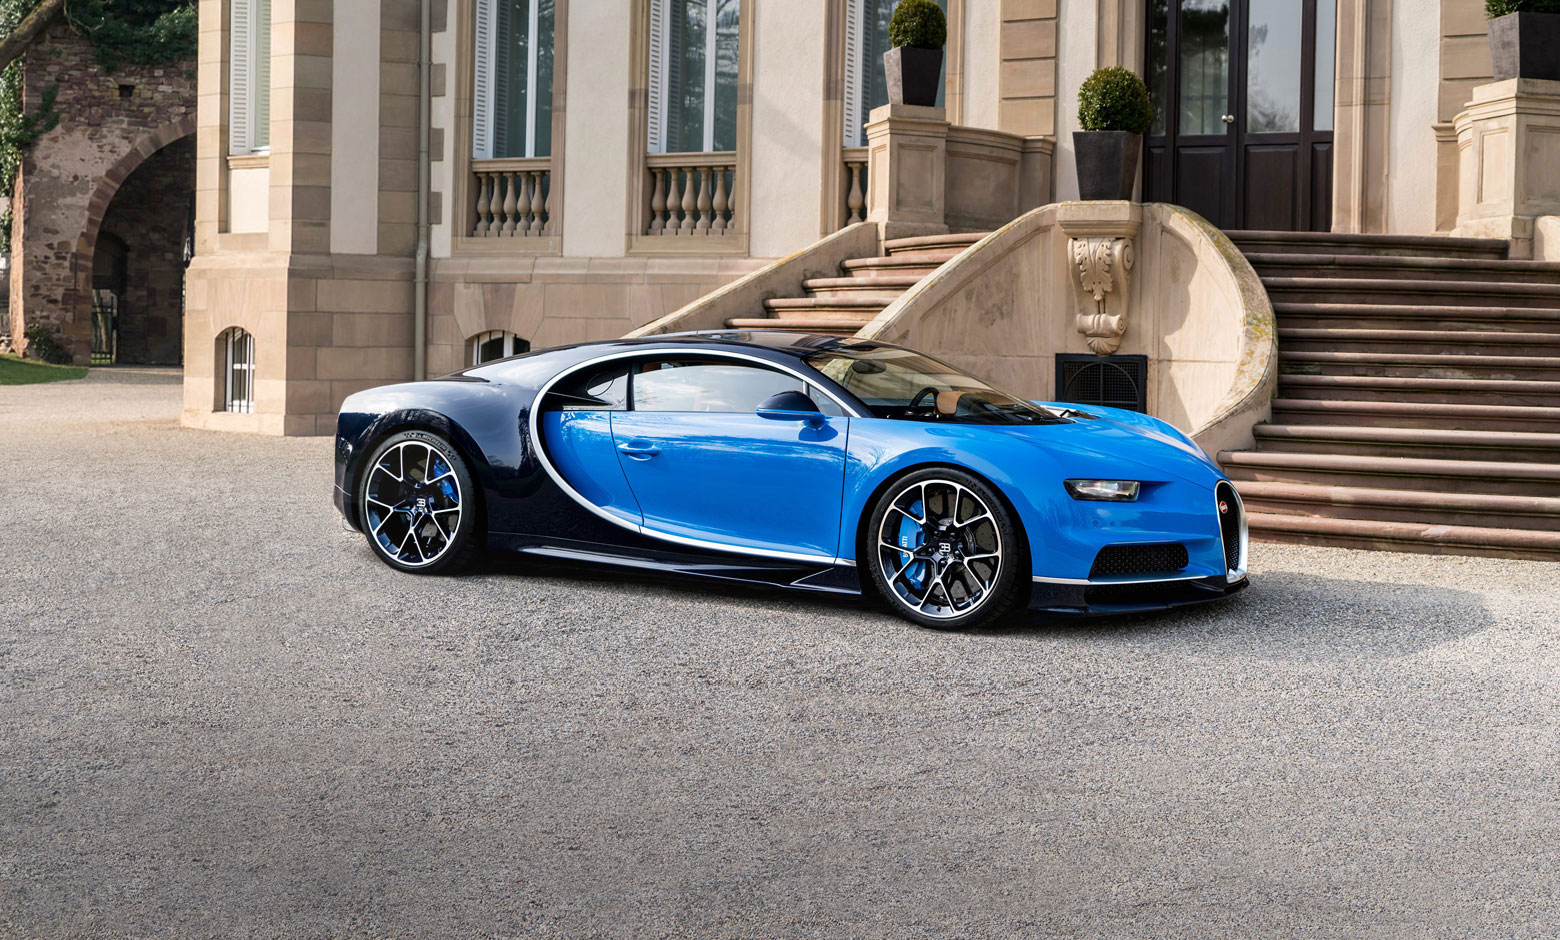 bao boxer mayweather continues to splash money to buy bugatti chiron supercars which are only produced about cars and cost up to million usd 651581c0e31df Boxer Mayweather Continues To 